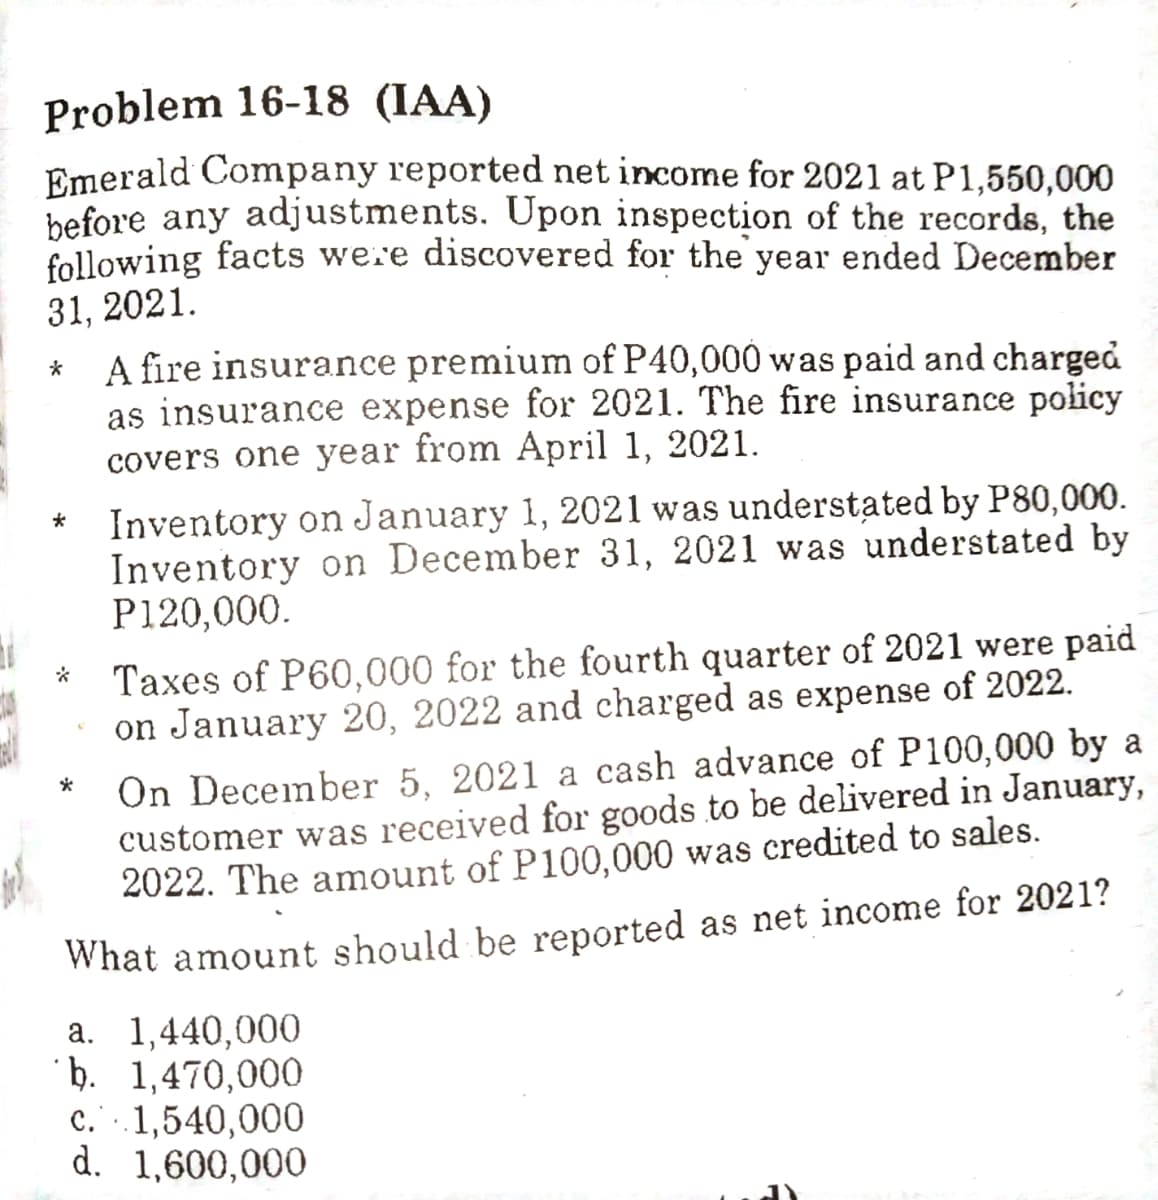 Problem 16-18 (IAA)
Emerald Company reported net income for 2021 at P1,550,000
before any adjustments. Upon inspection of the records, the
following facts we.e discovered for the year ended December
31, 2021.
A fire insurance premium of P40,000 was paid and charged
as insurance expense for 2021. The fire insurance policy
covers one year from April 1, 2021.
Inventory on January 1, 2021 was understated by P80,000.
Inventory on December 31, 2021 was understated by
P120,000.
Taxes of P60,000 for the fourth quarter of 2021 were paid
on January 20, 2022 and charged as expense of 2022.
On December 5, 2021 a cash advance of P100,000 by a
customer was received for goods to be delivered in January,
2022. The amount of P100,000 was credited to sales.
What amount should be reported as net income for 2021?
a. 1,440,000
þ. 1,470,000
c. .1,540,000
d. 1,600,000
